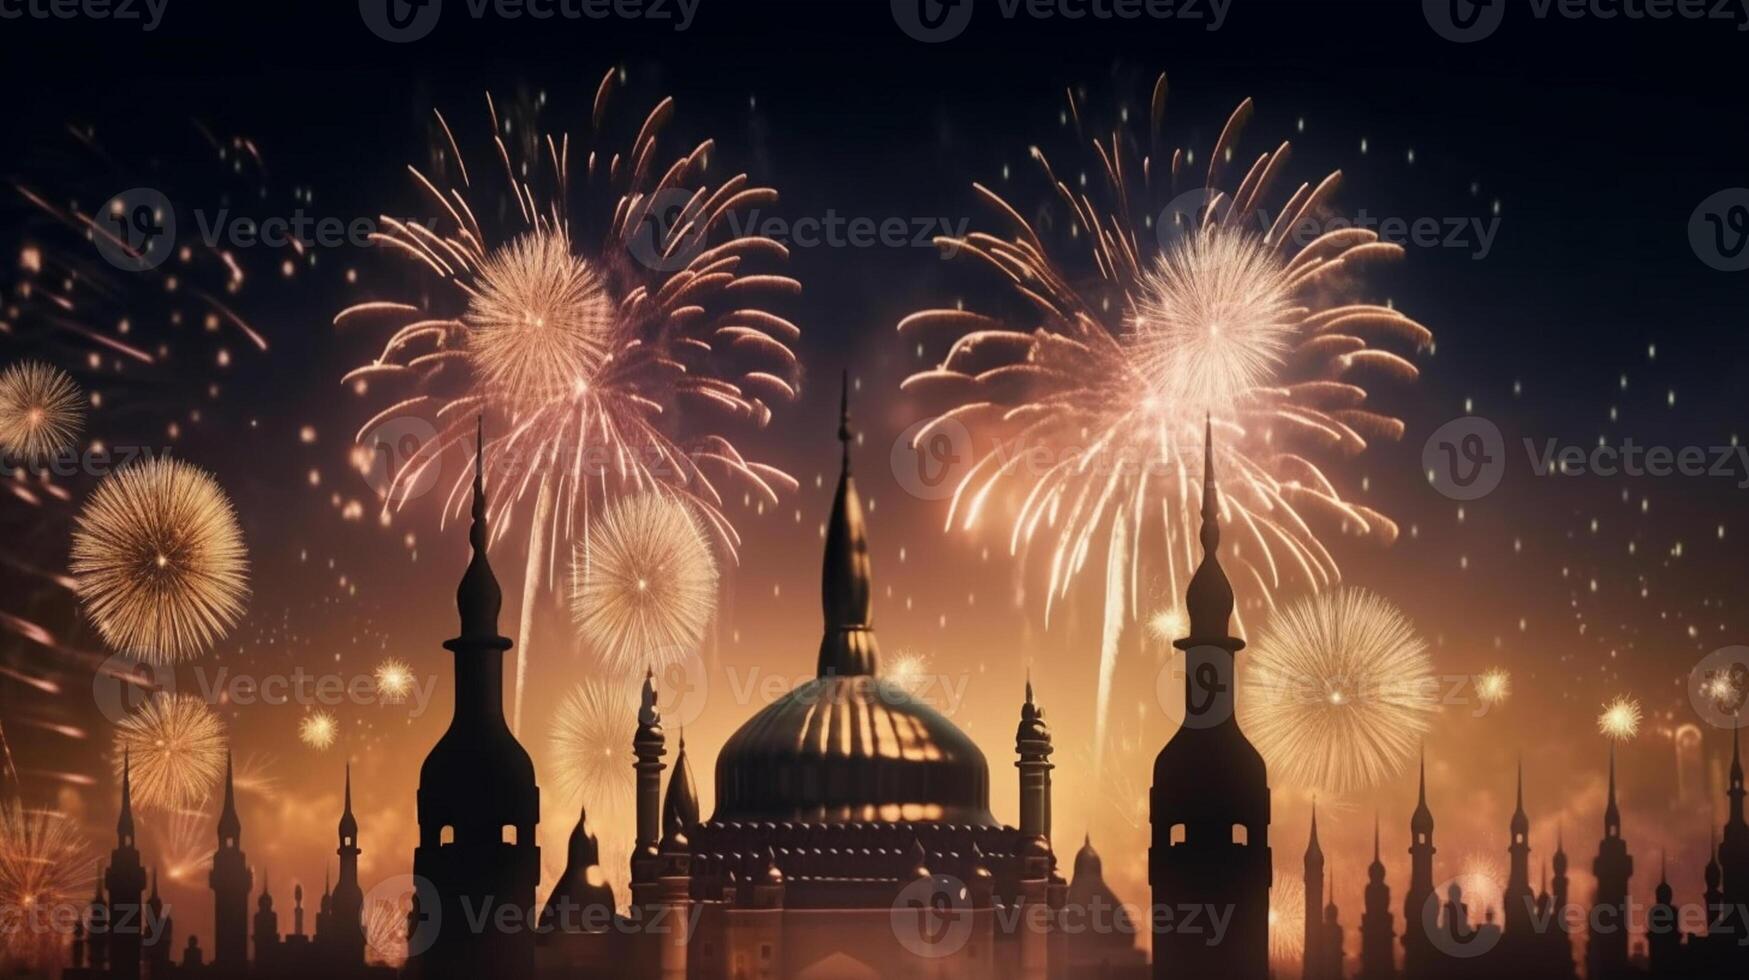 Celebration background with a mosque and fireworks in the night sky. Eid celebration concept artwork photo